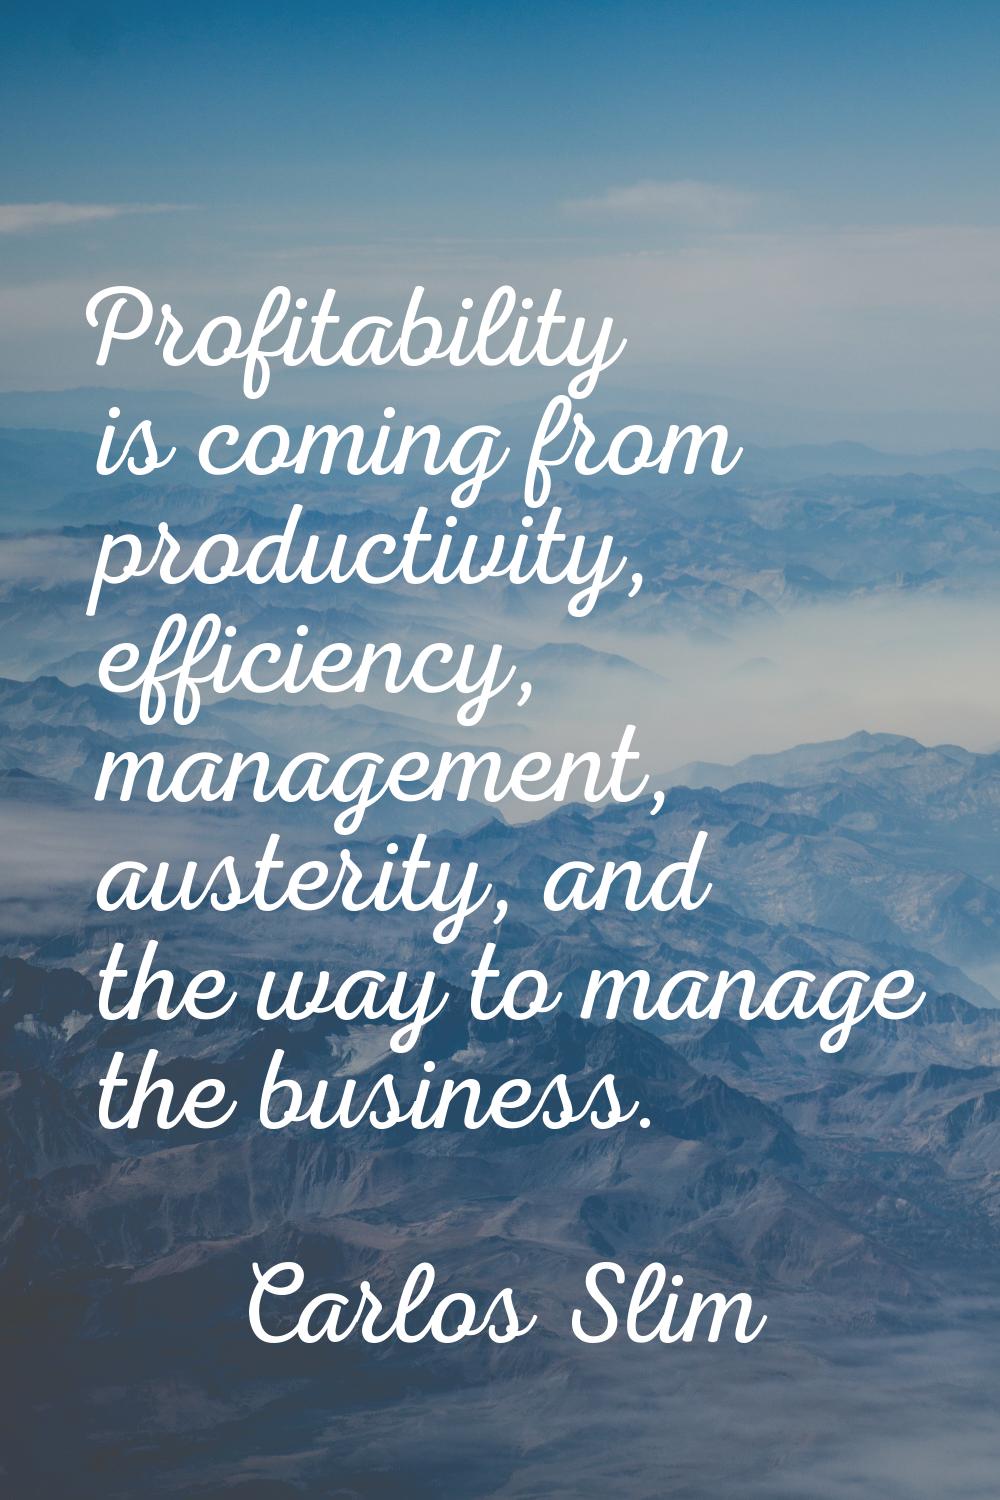 Profitability is coming from productivity, efficiency, management, austerity, and the way to manage